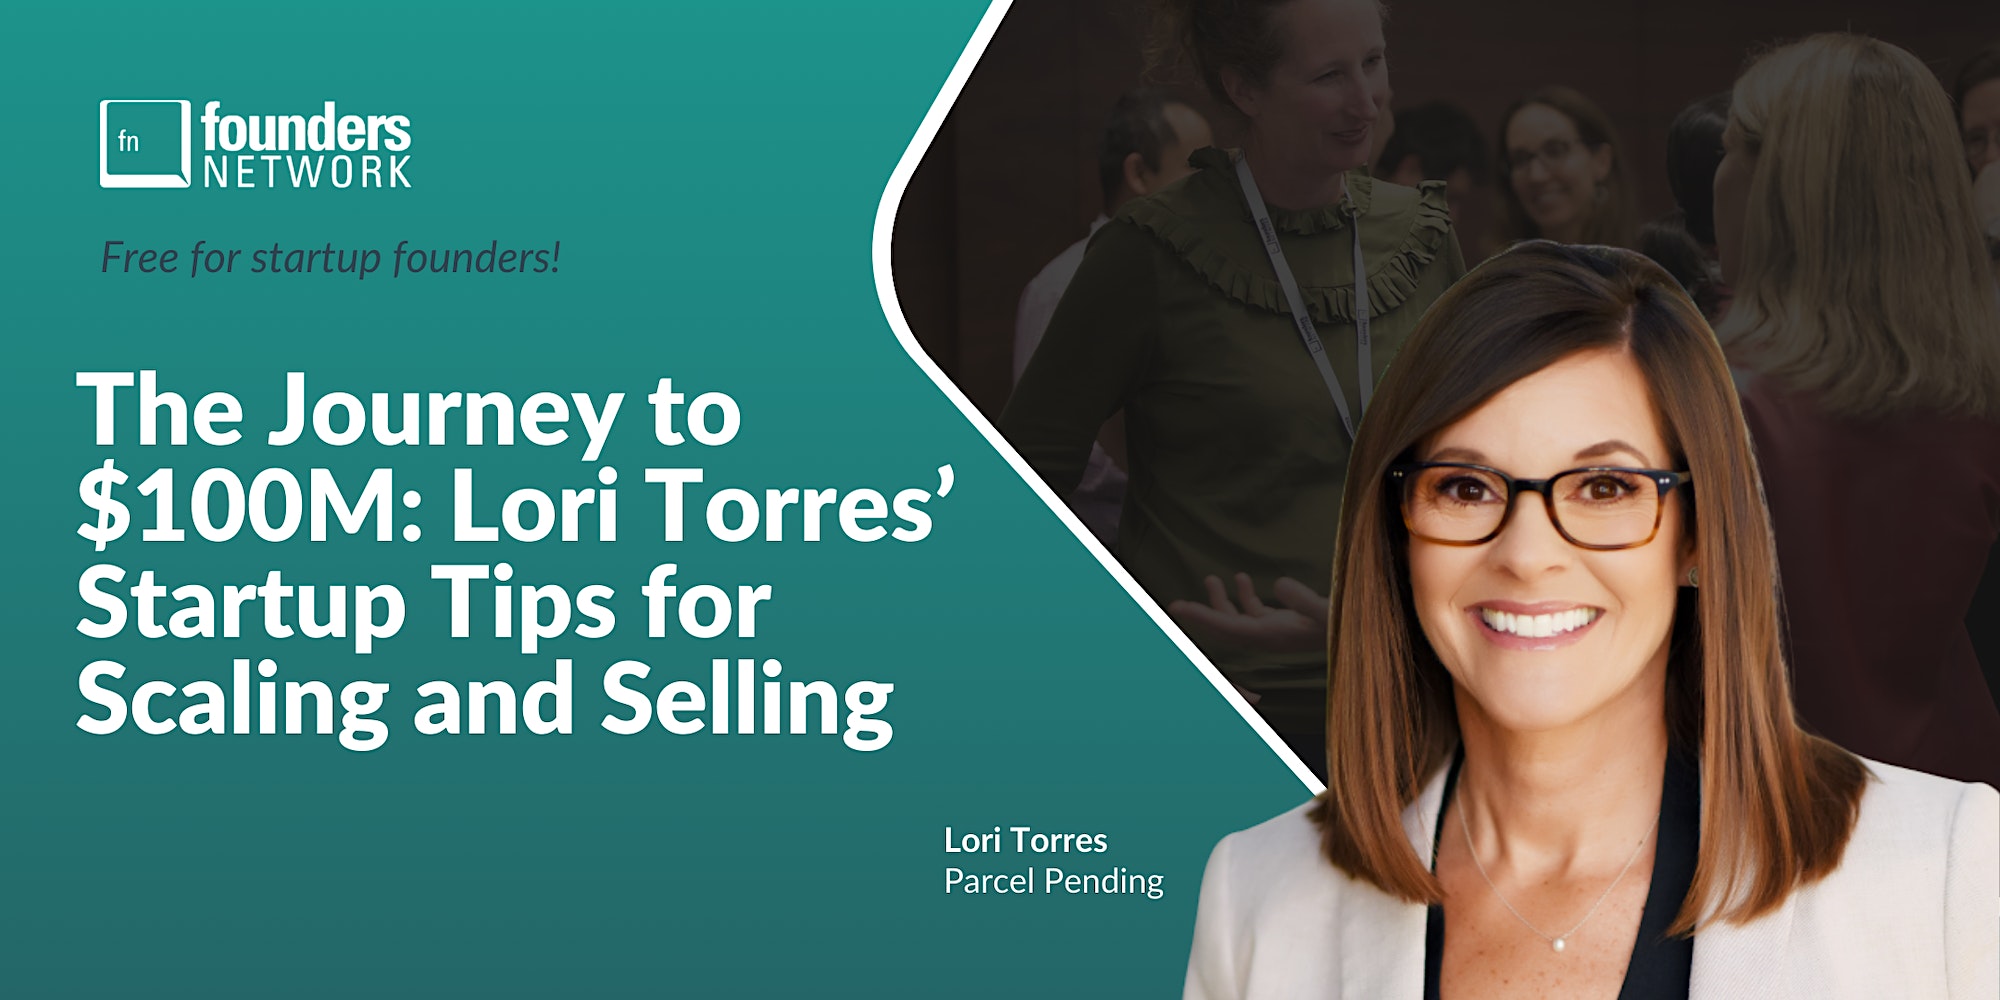 Featured image for “The Journey to $100M: Lori Torres’ Startup Tips for Scaling and Selling”